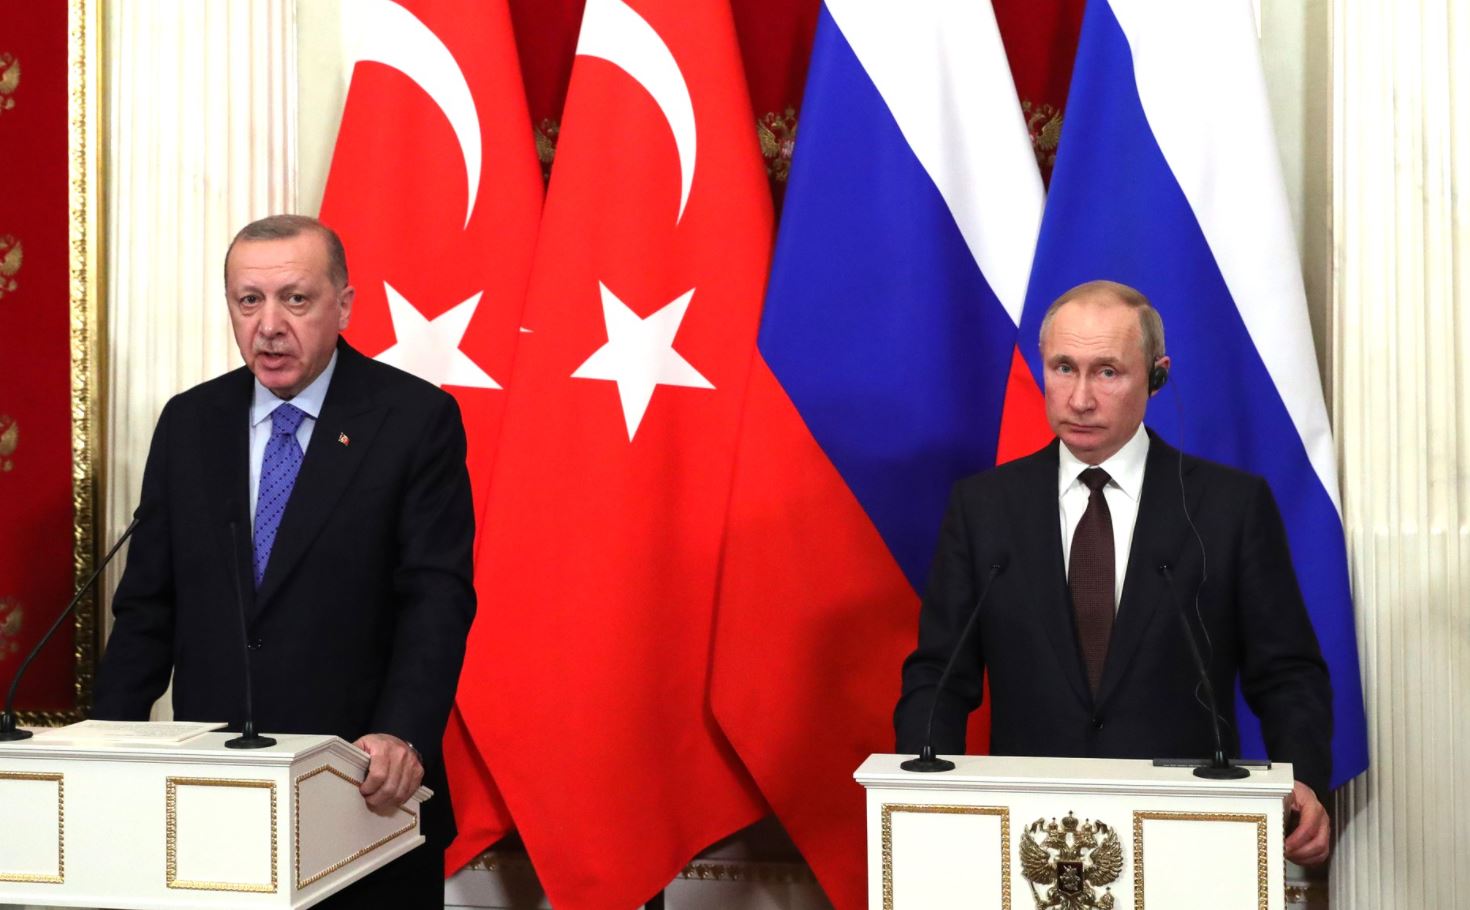 Russian President Vladimir Putin and Turkish President Recep Tayyip Erdogan pictured during a joint press conference in Moscow, March 5, 2020 (Photo: Official website of the President of Russia)